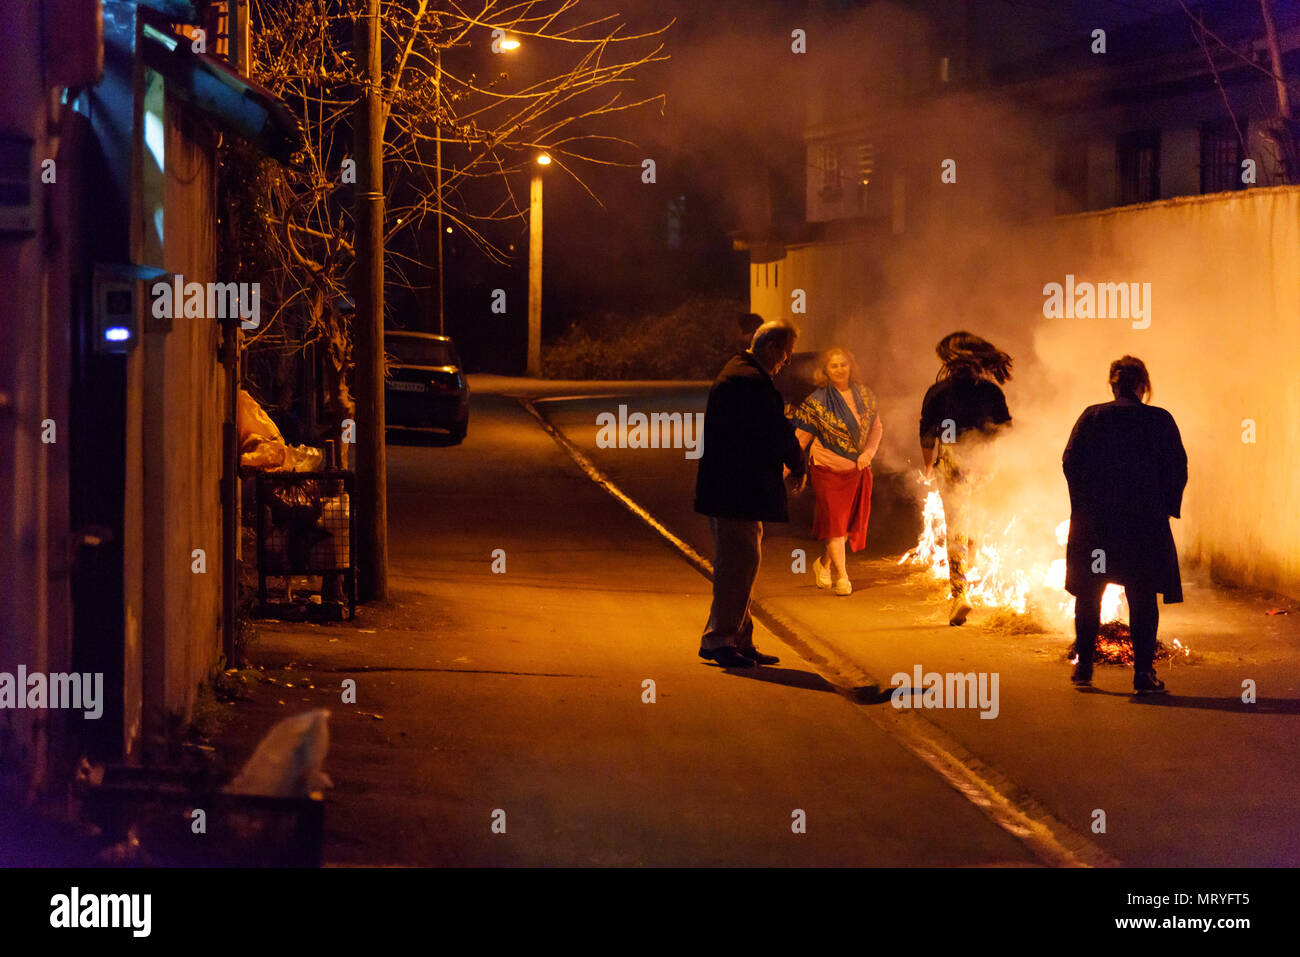 Astara, Gilan Province, Iran - March 13, 2018: Chaharshanbe Suri is persian Festival of Fire celebrated on the eve of the last Wednesday before Nowruz Stock Photo